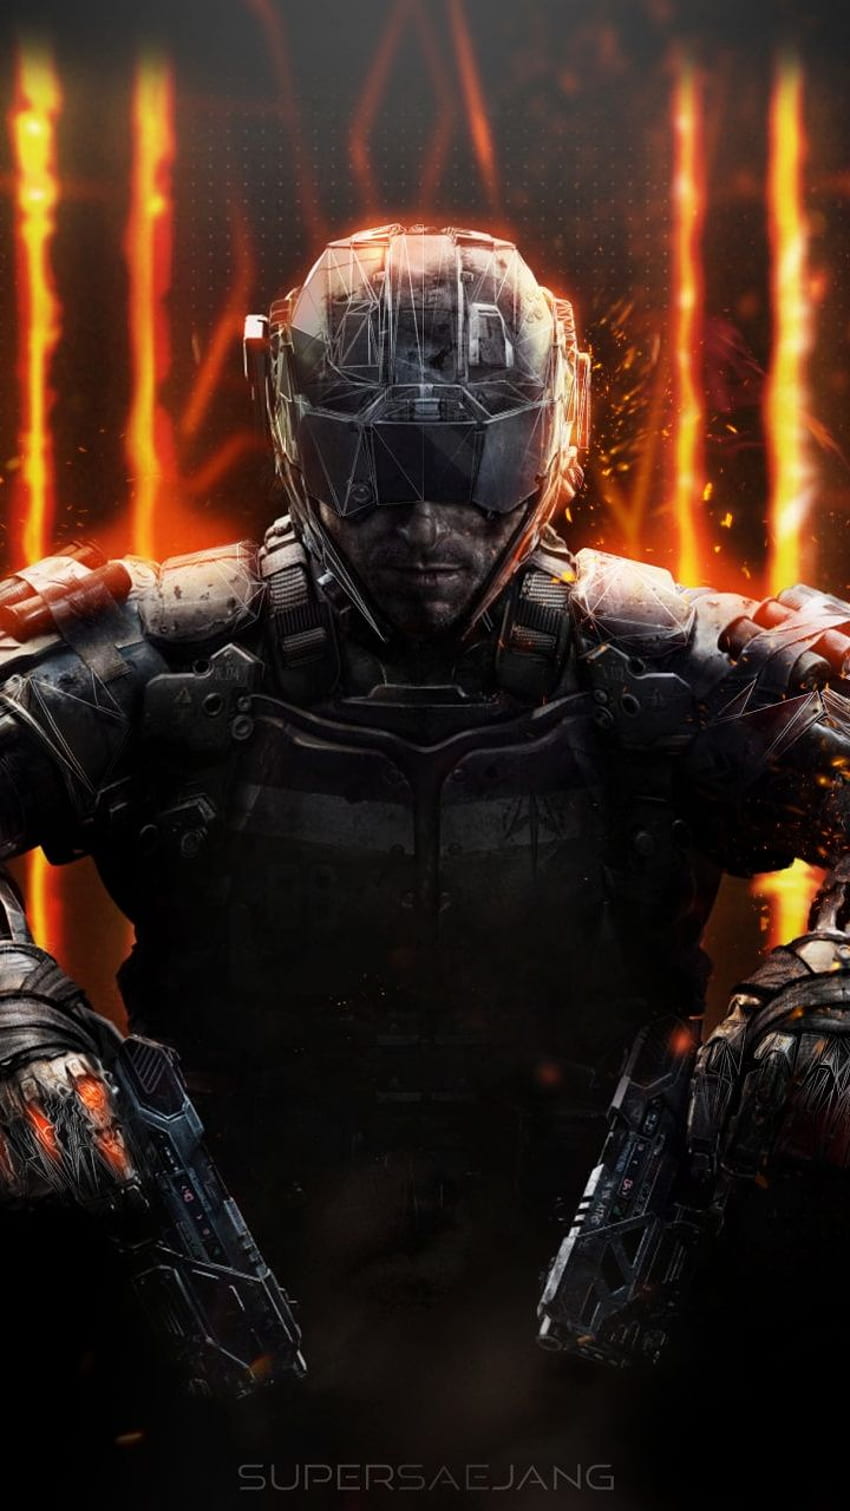 70 Call of Duty Black Ops III HD Wallpapers and Backgrounds